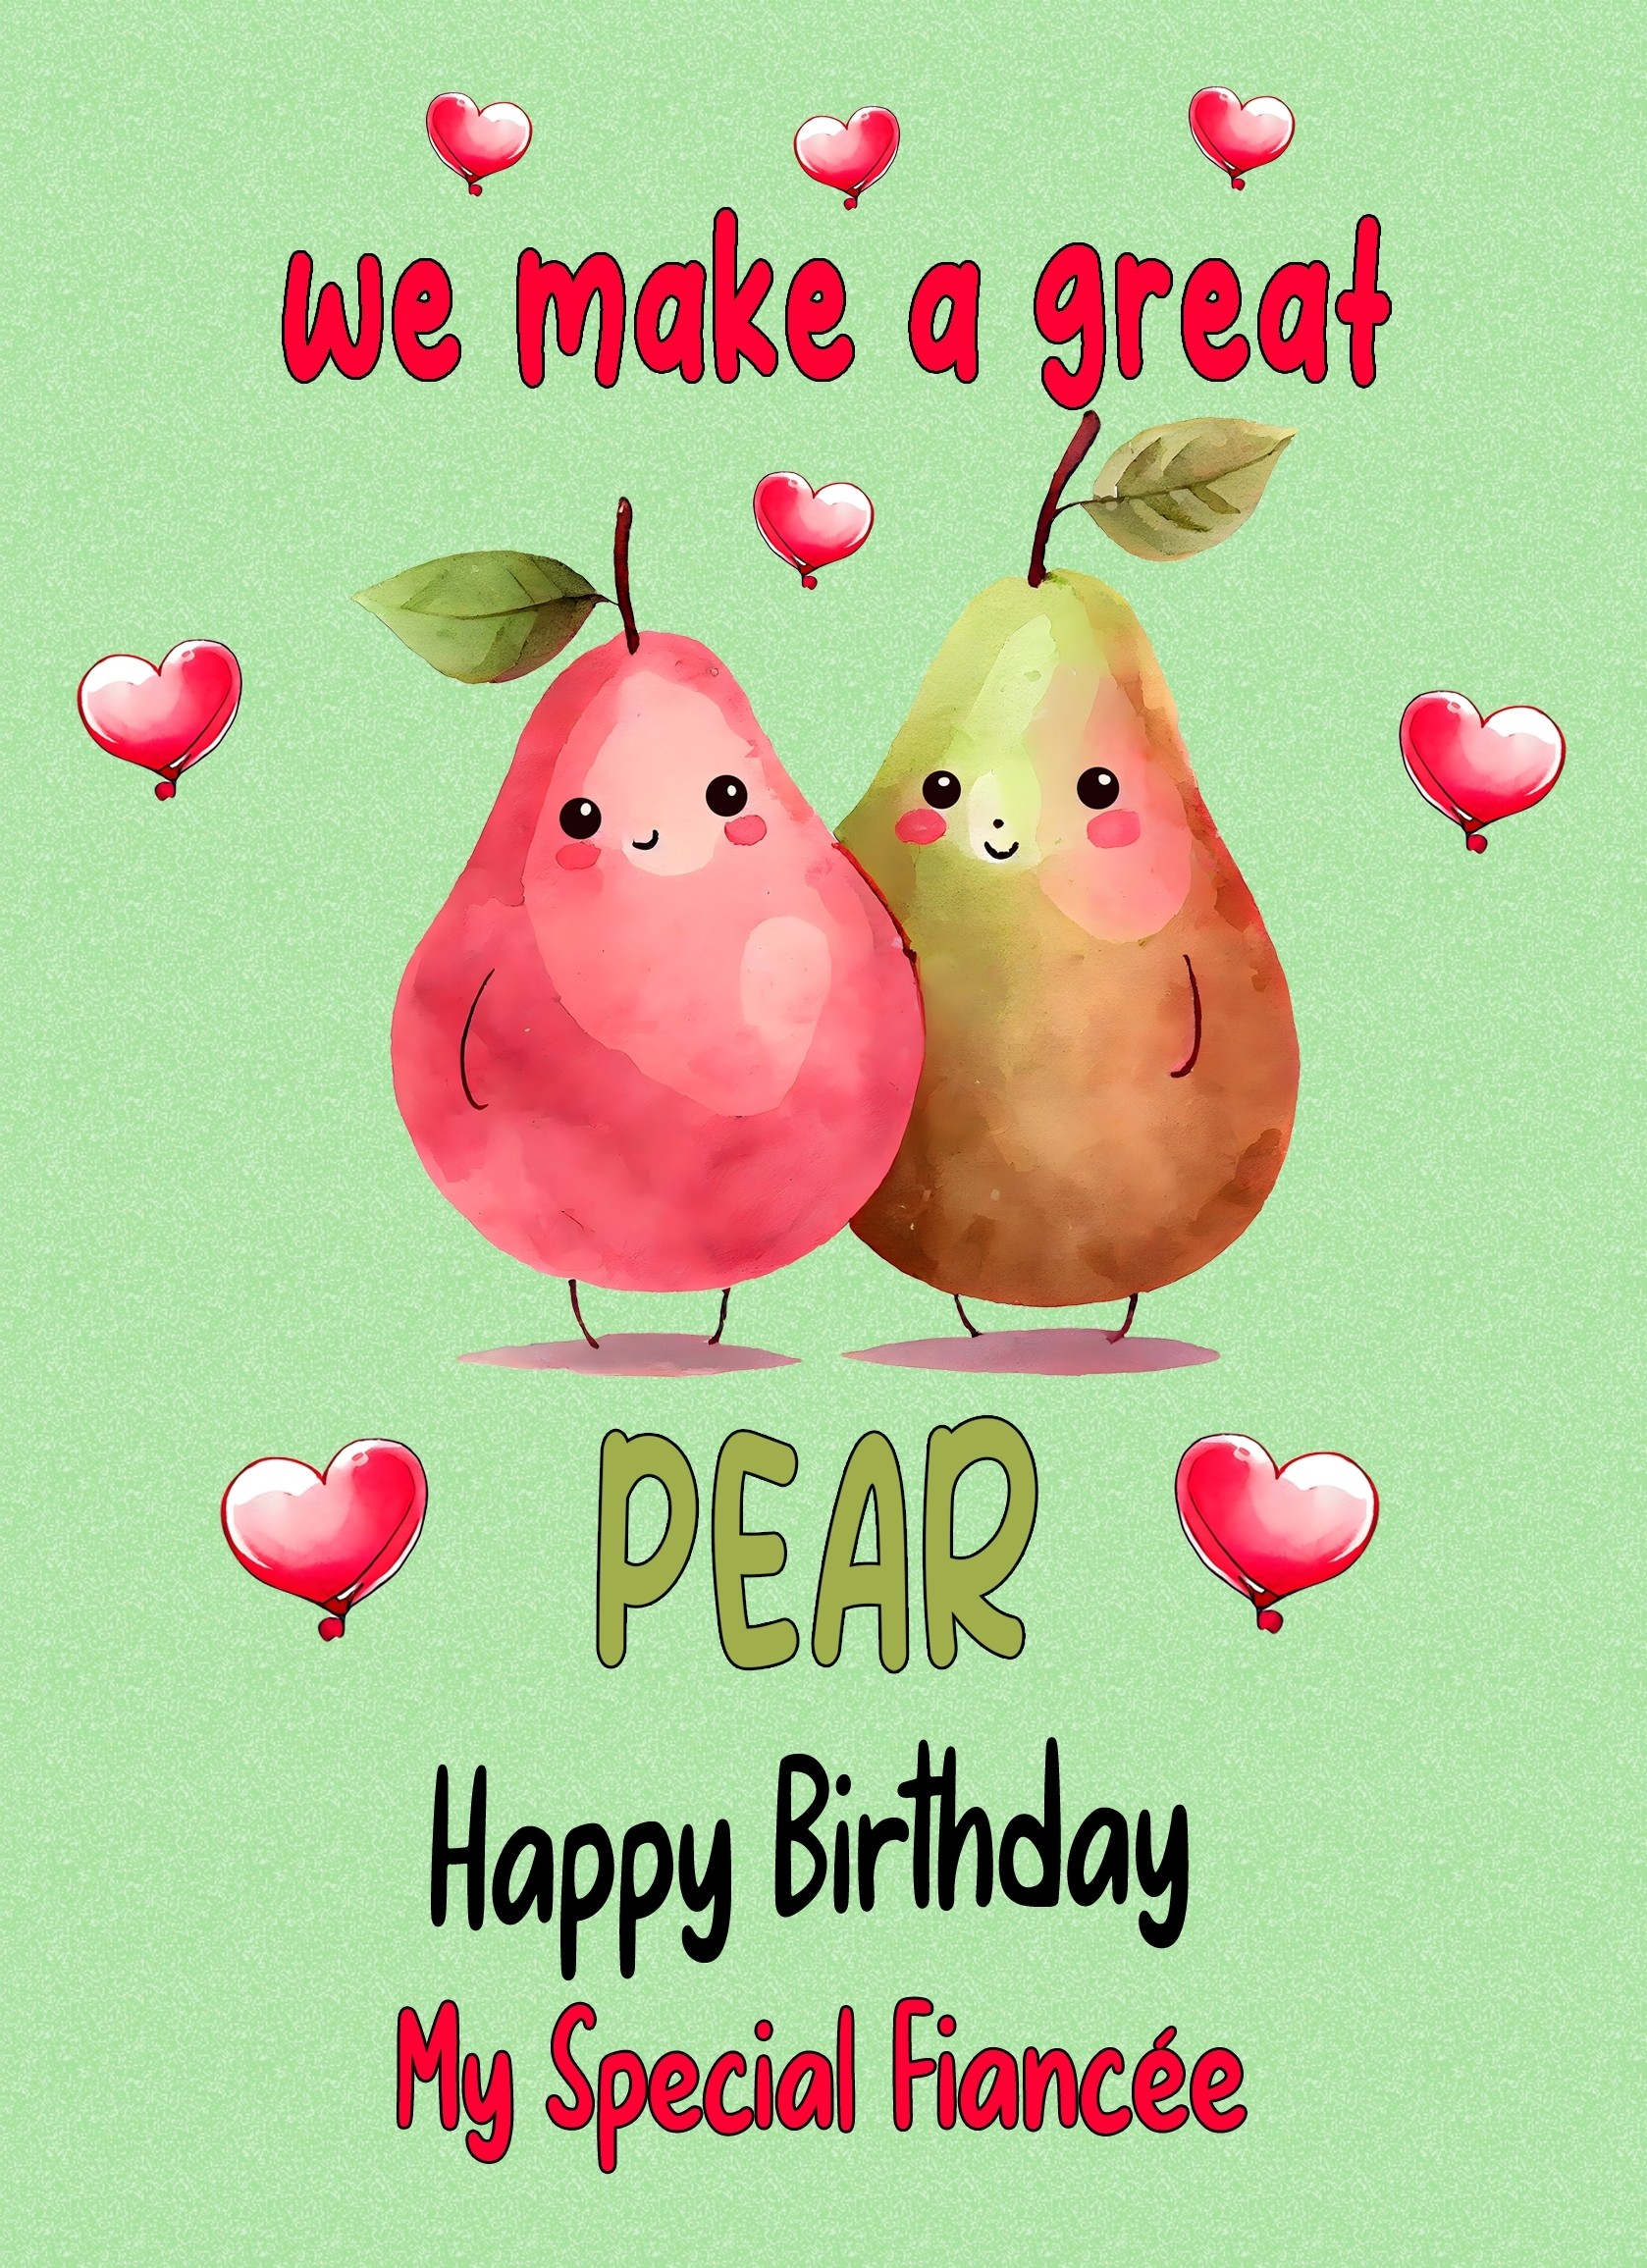 Funny Pun Romantic Birthday Card for Fiancee (Great Pear)